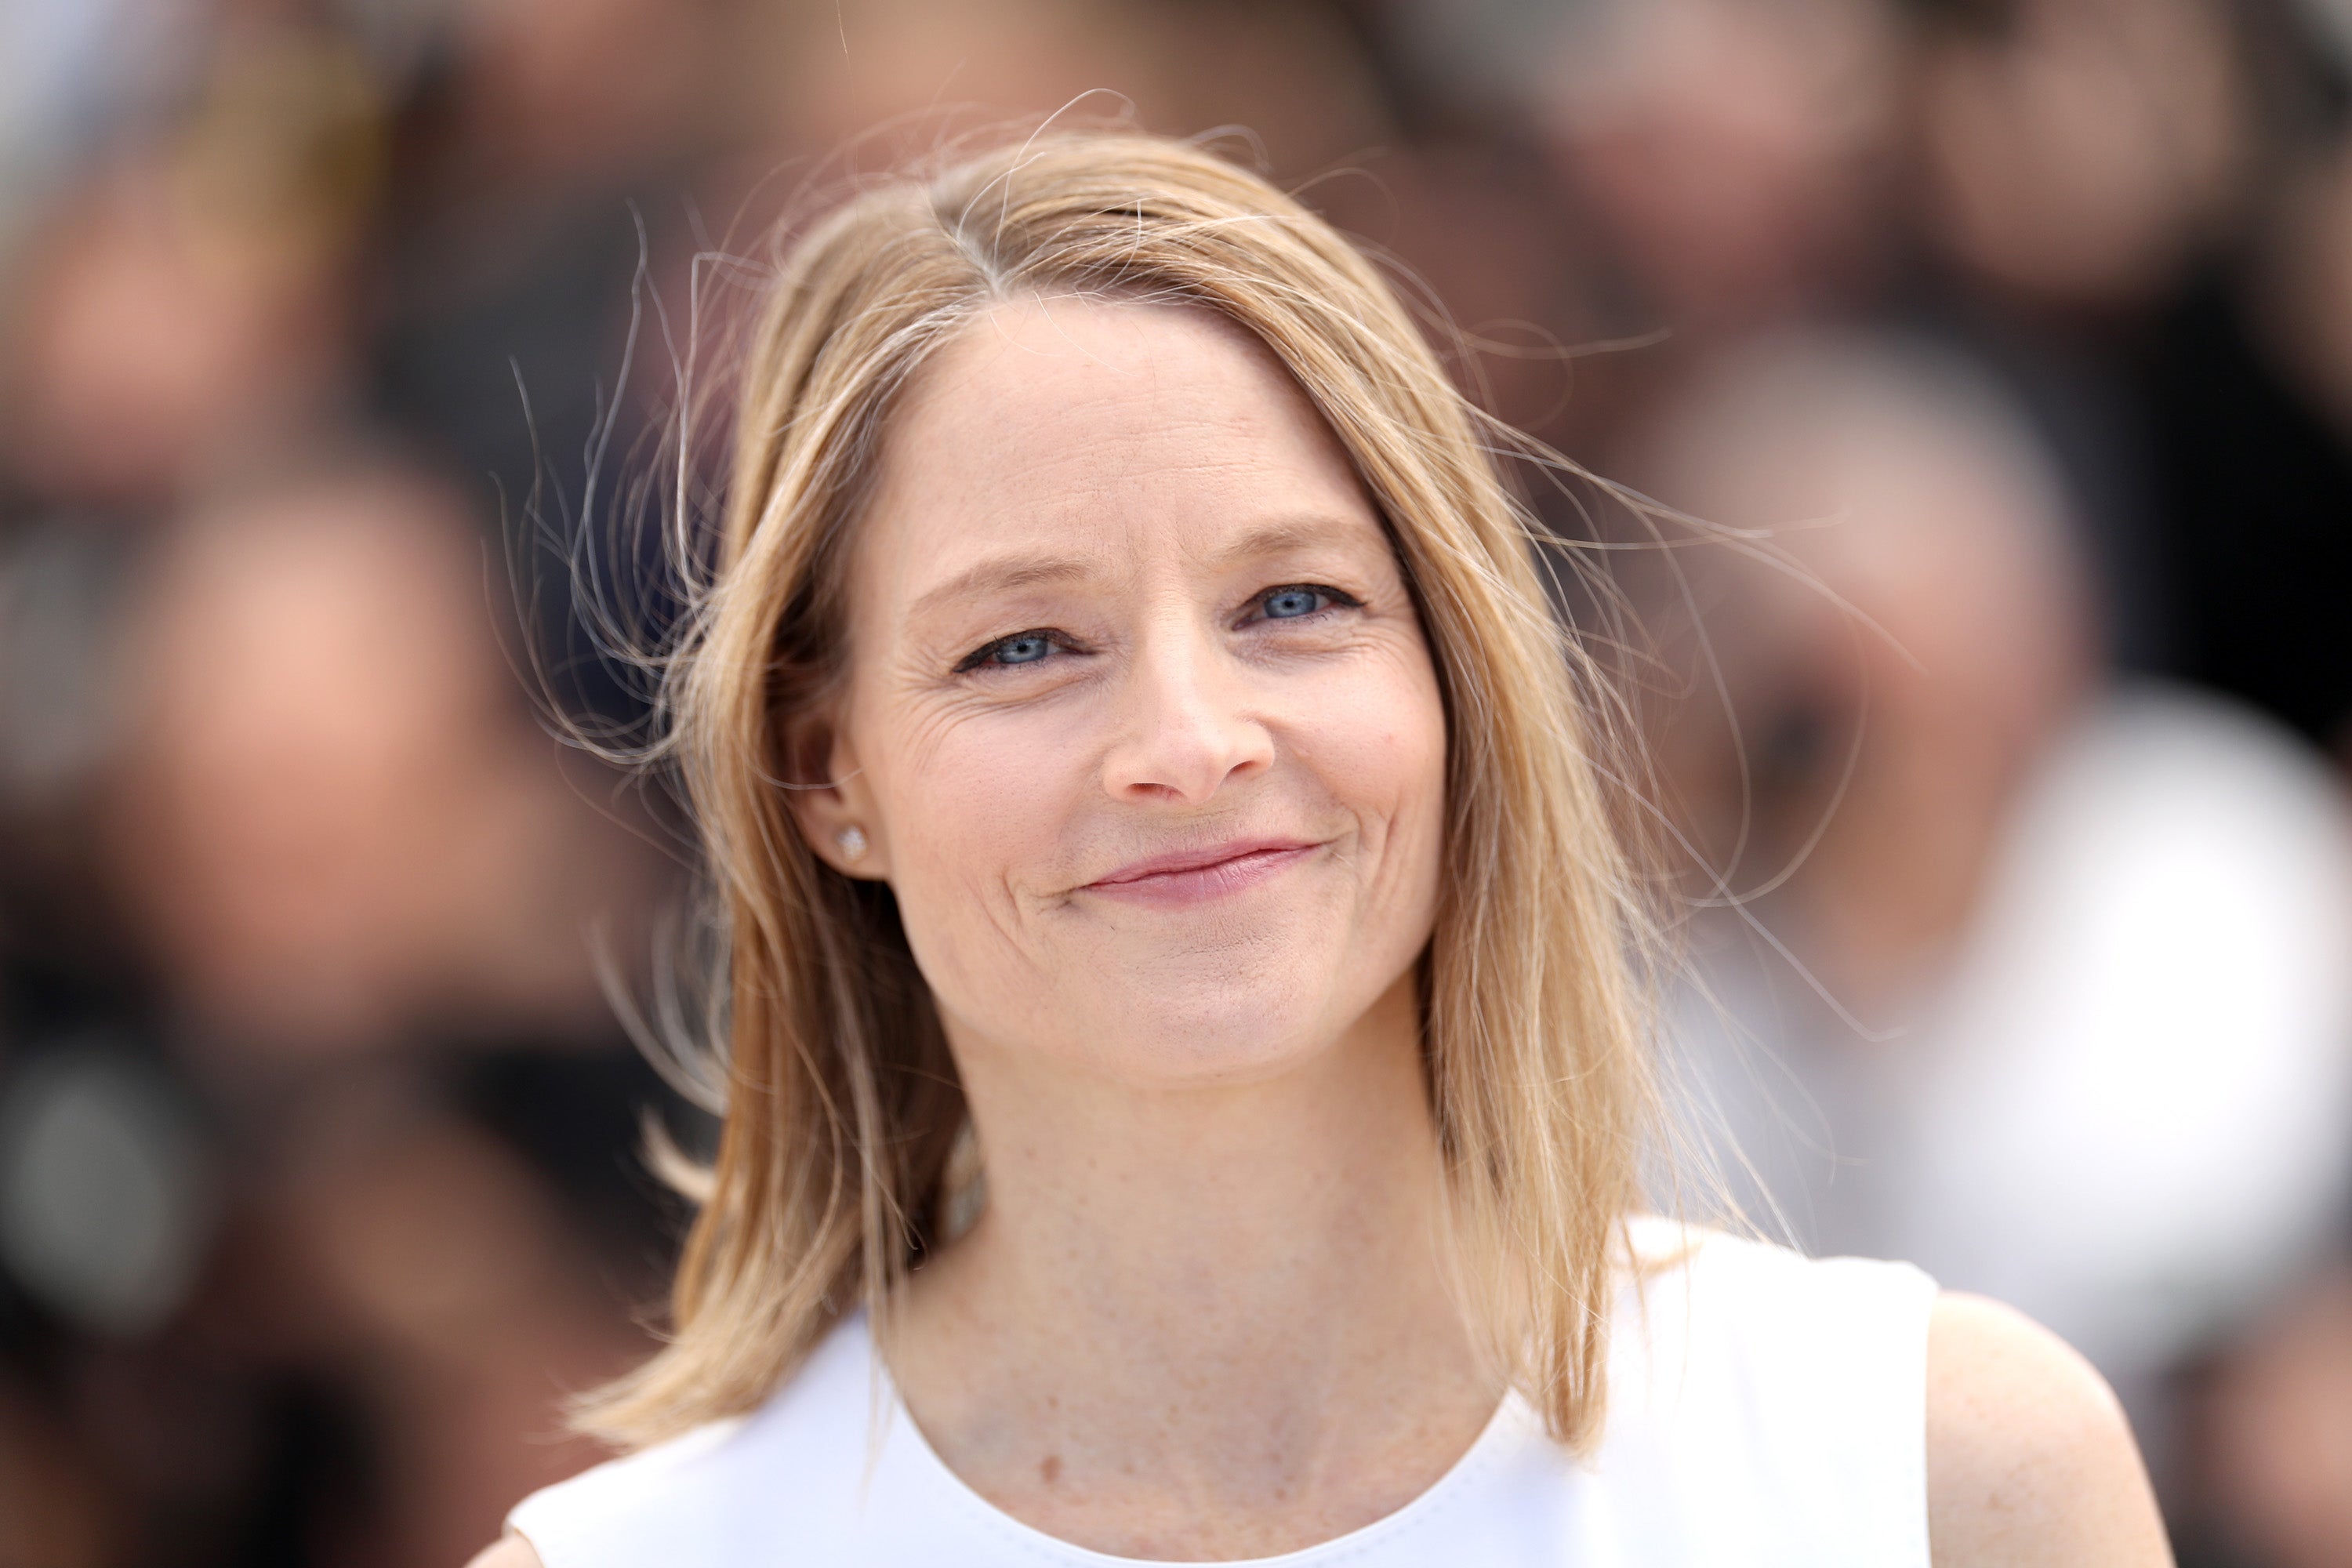 Jodie Foster discusses being a child star and how it may have